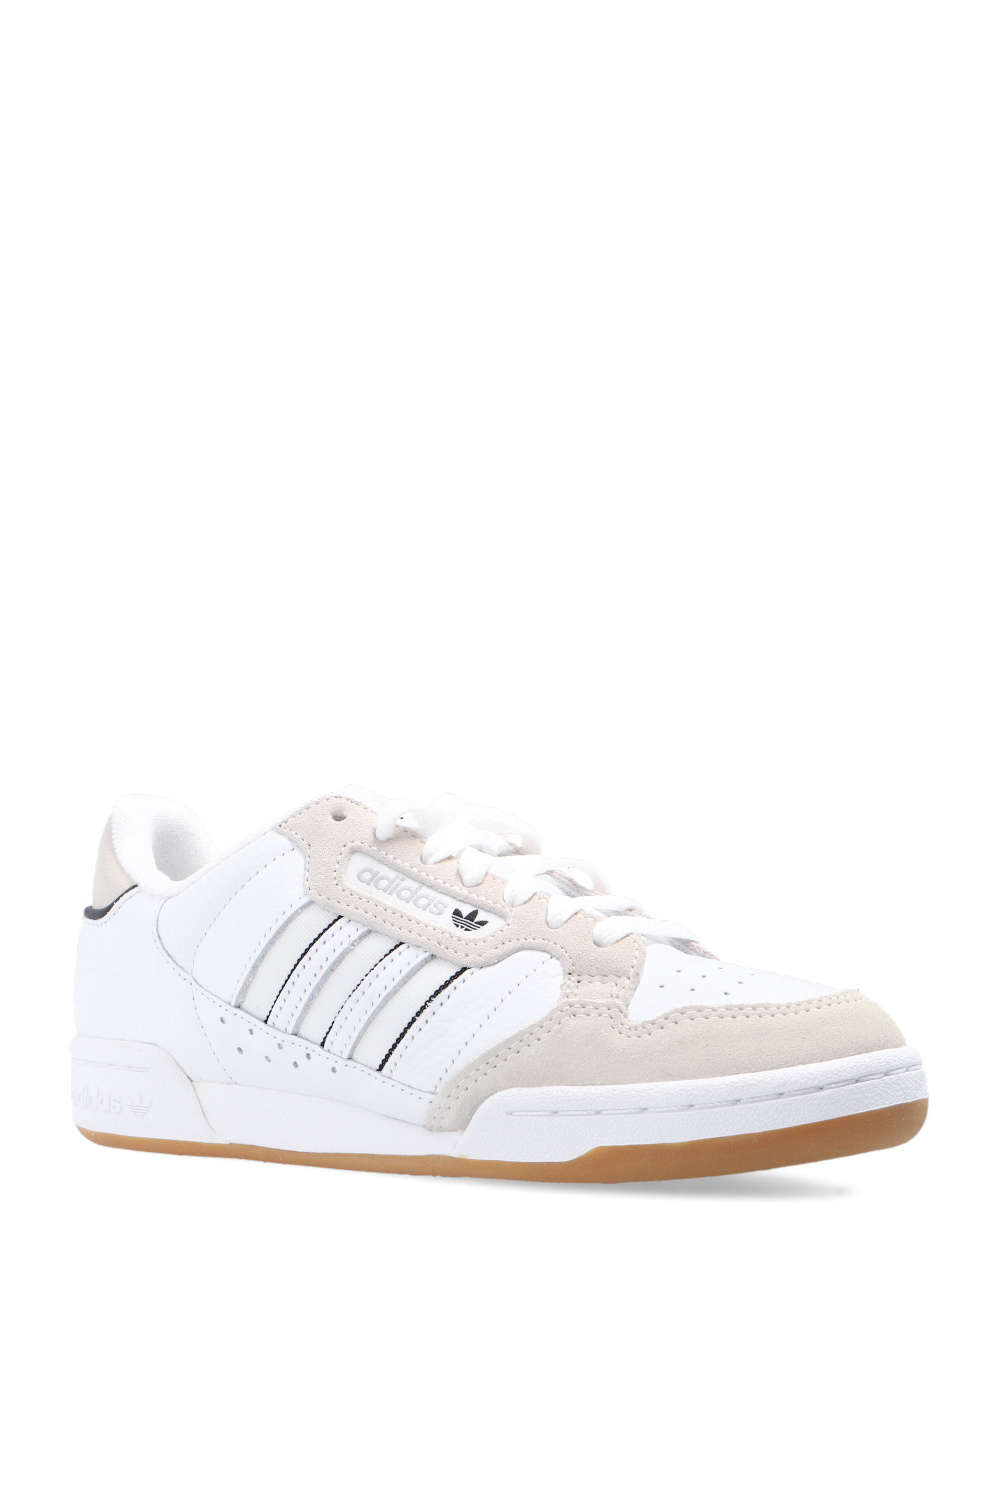 80 \'Continental champion white | Women\'s xr_1 boost Originals adidas Shoes nmd Stripes\' | x | sneakers ADIDAS IetpShops